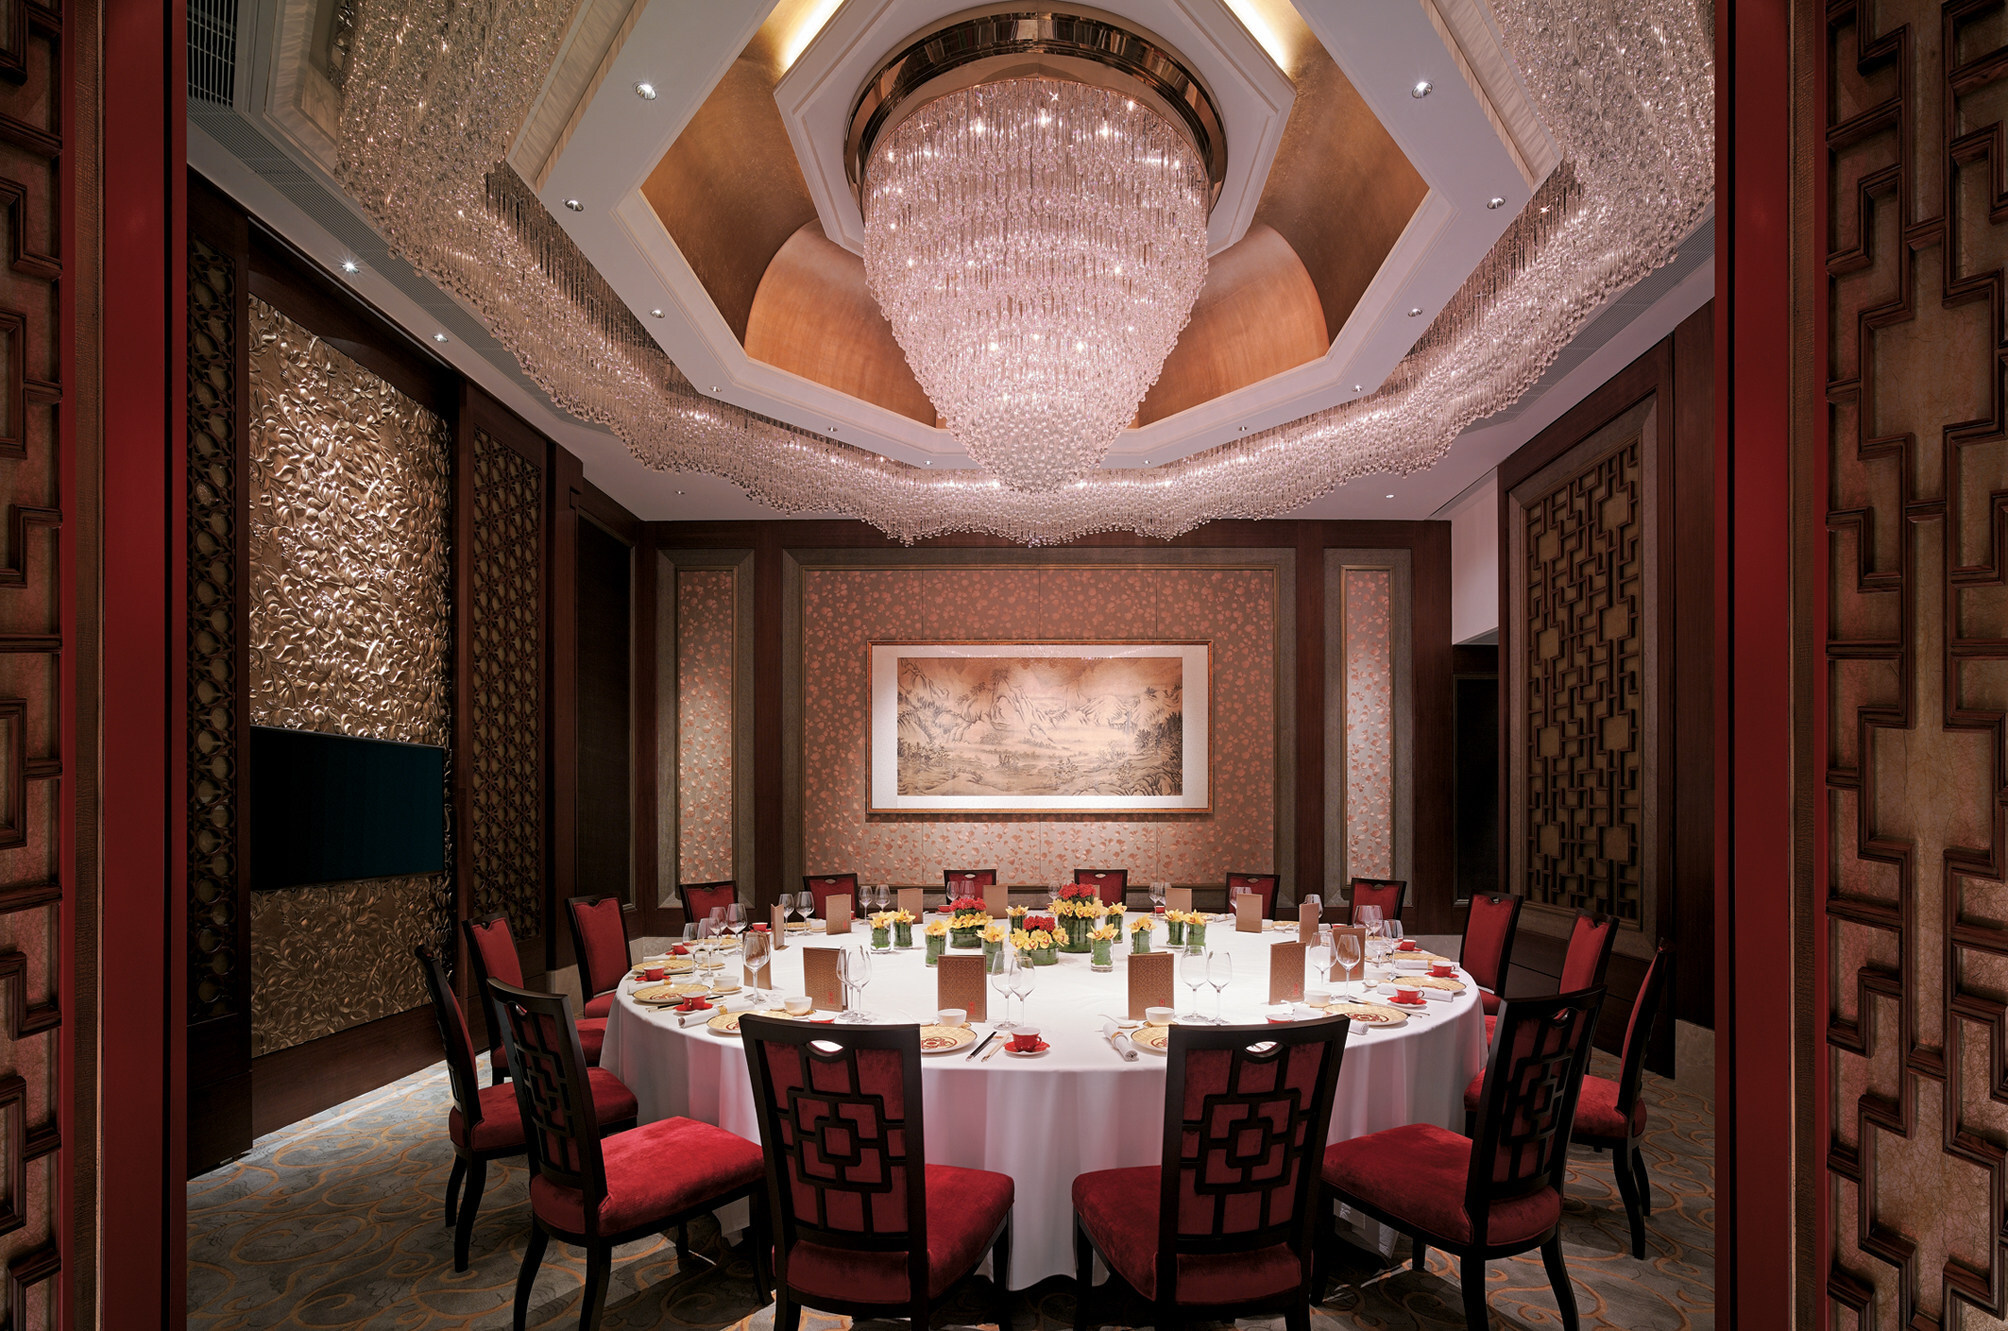 Shang Palace’s grand private dining room. Photo: handout